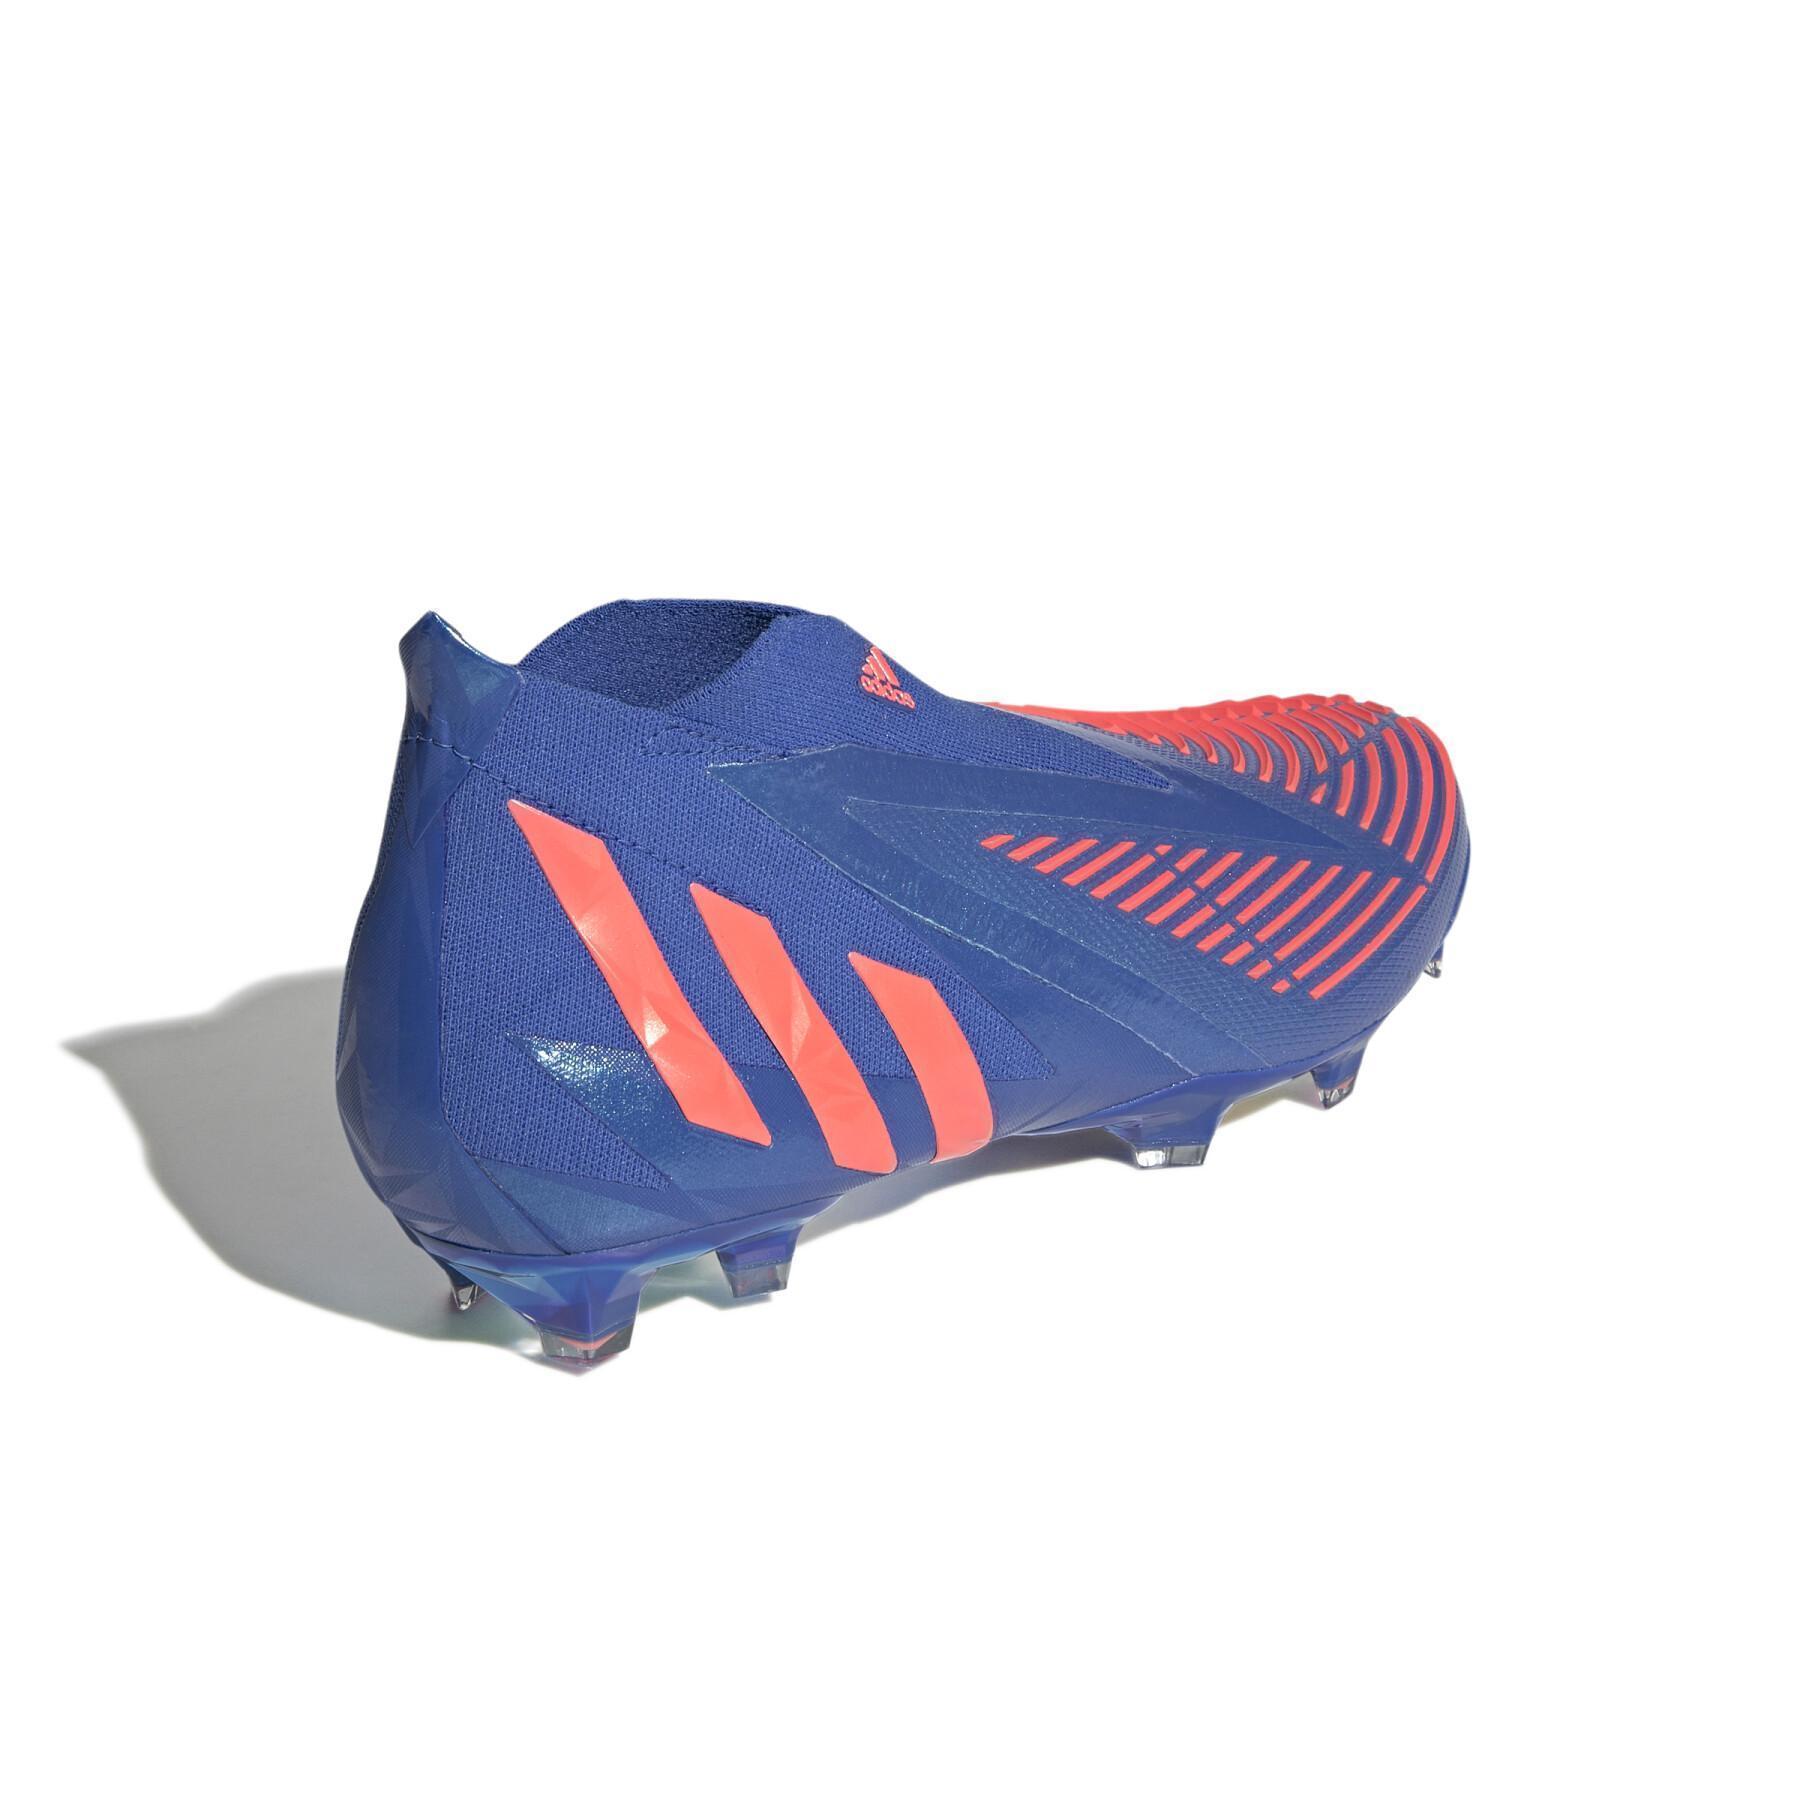 adidas Launch The New Predator Edge As Part Of The Sapphire Edge Pack -  SoccerBible